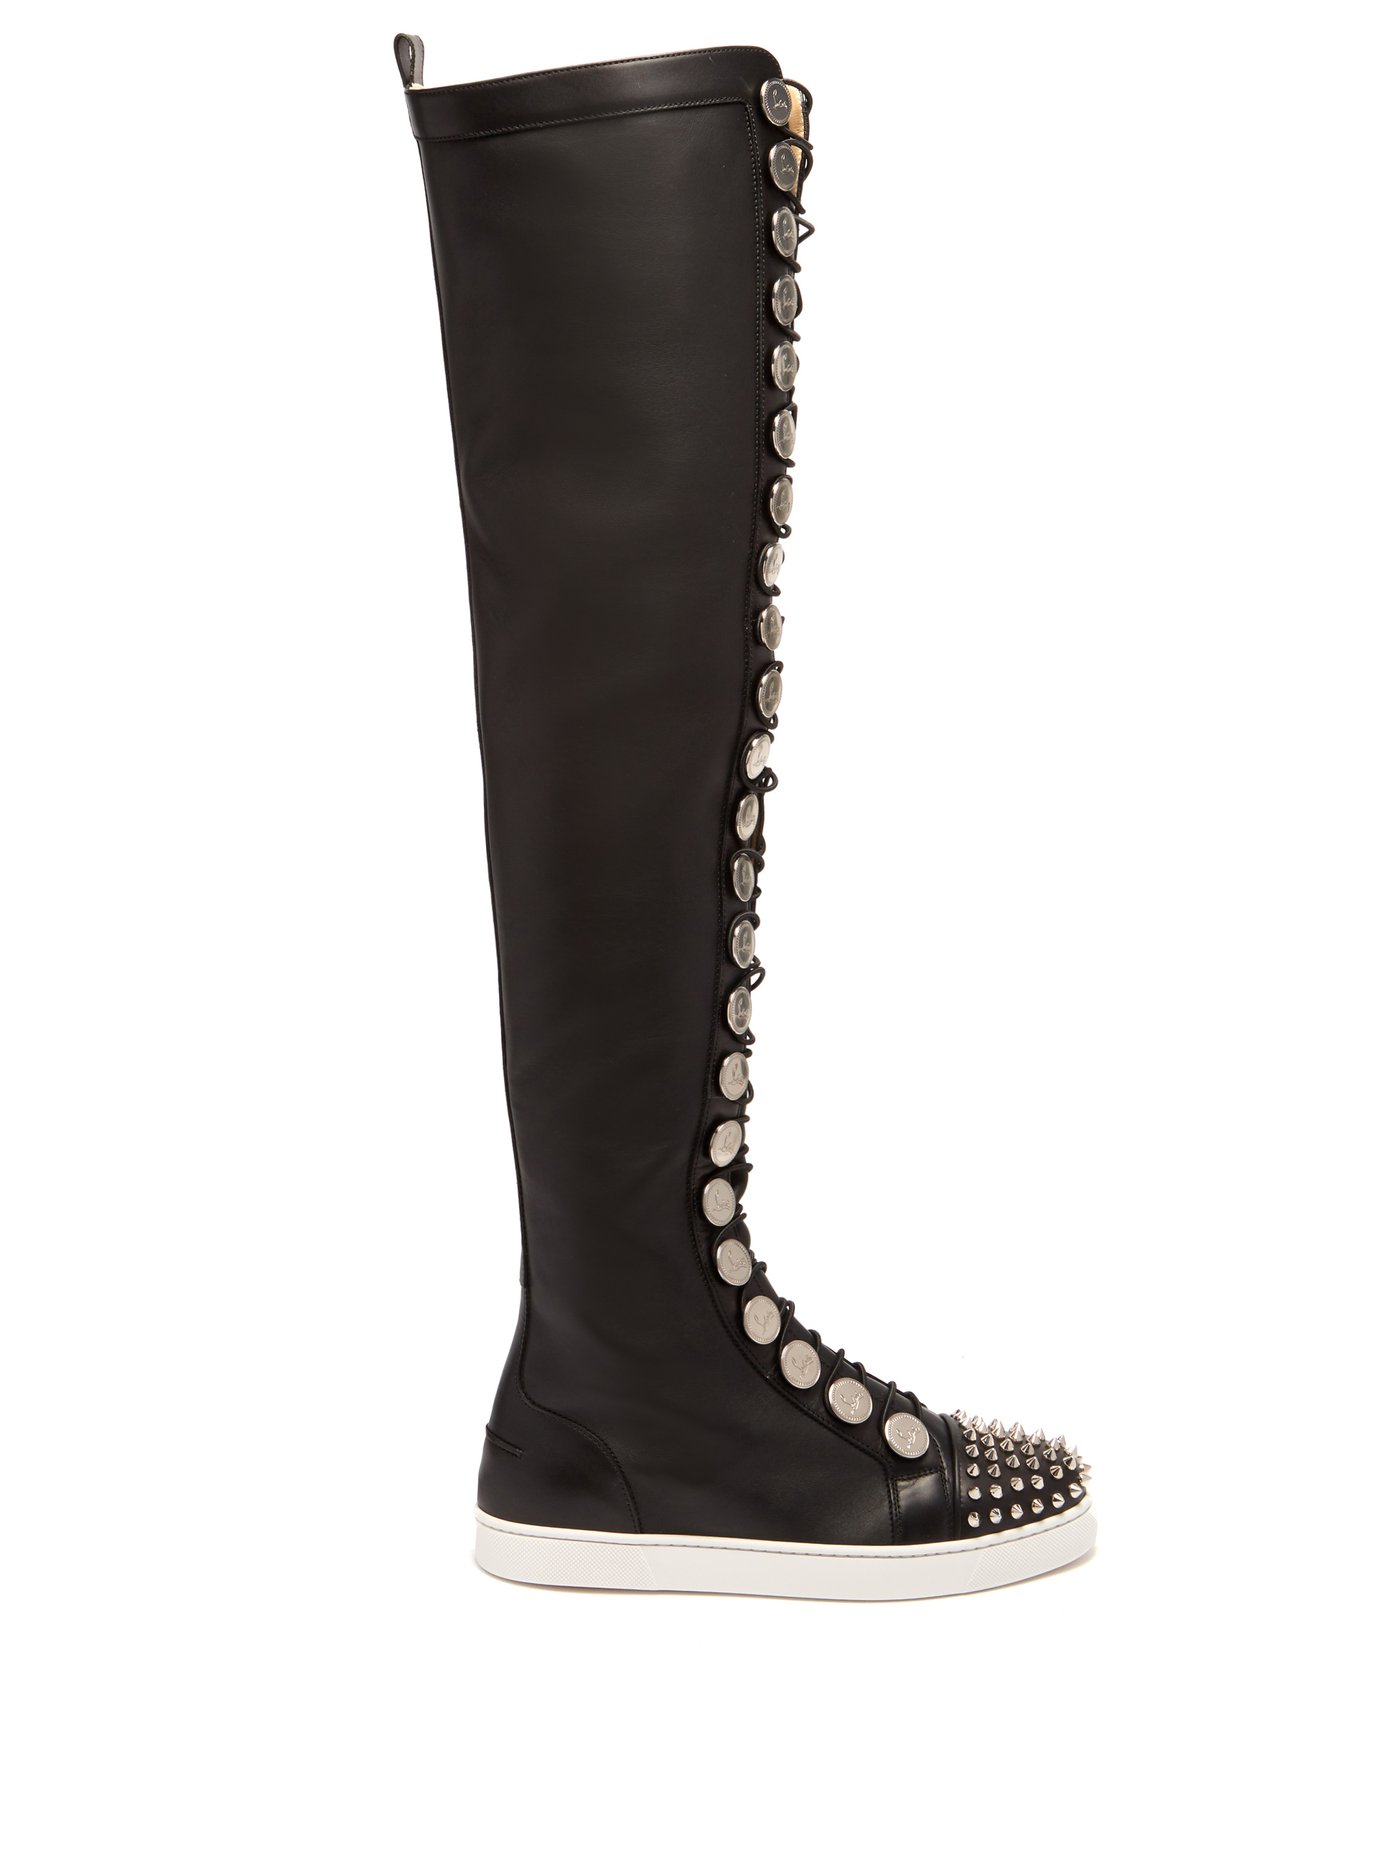 louboutin over the knee high boots